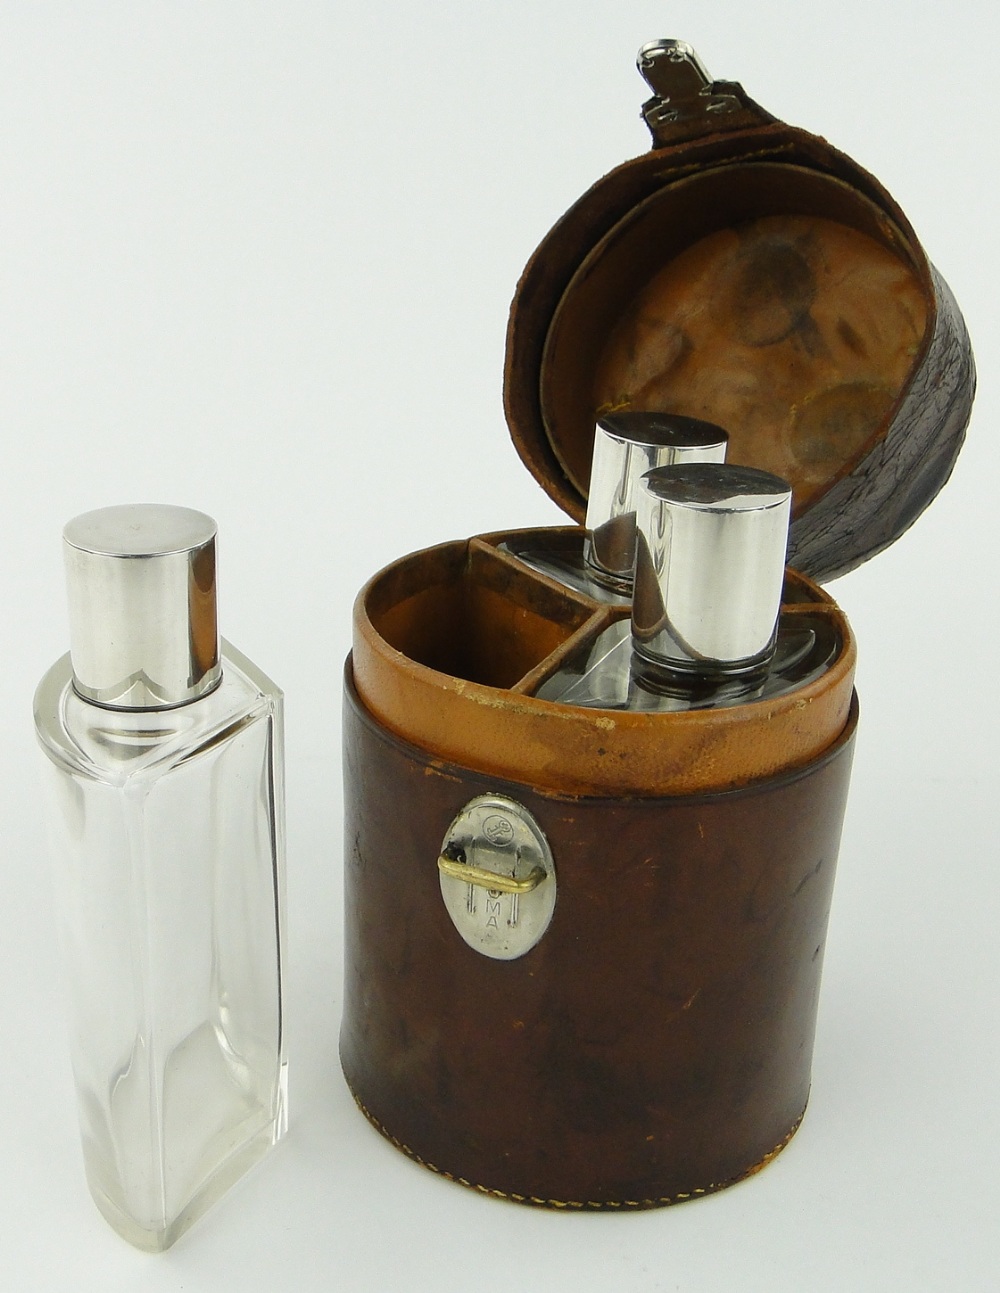 A nesting set of 3 cut-glass spirit bottles with silver tops,
circa 1940s,